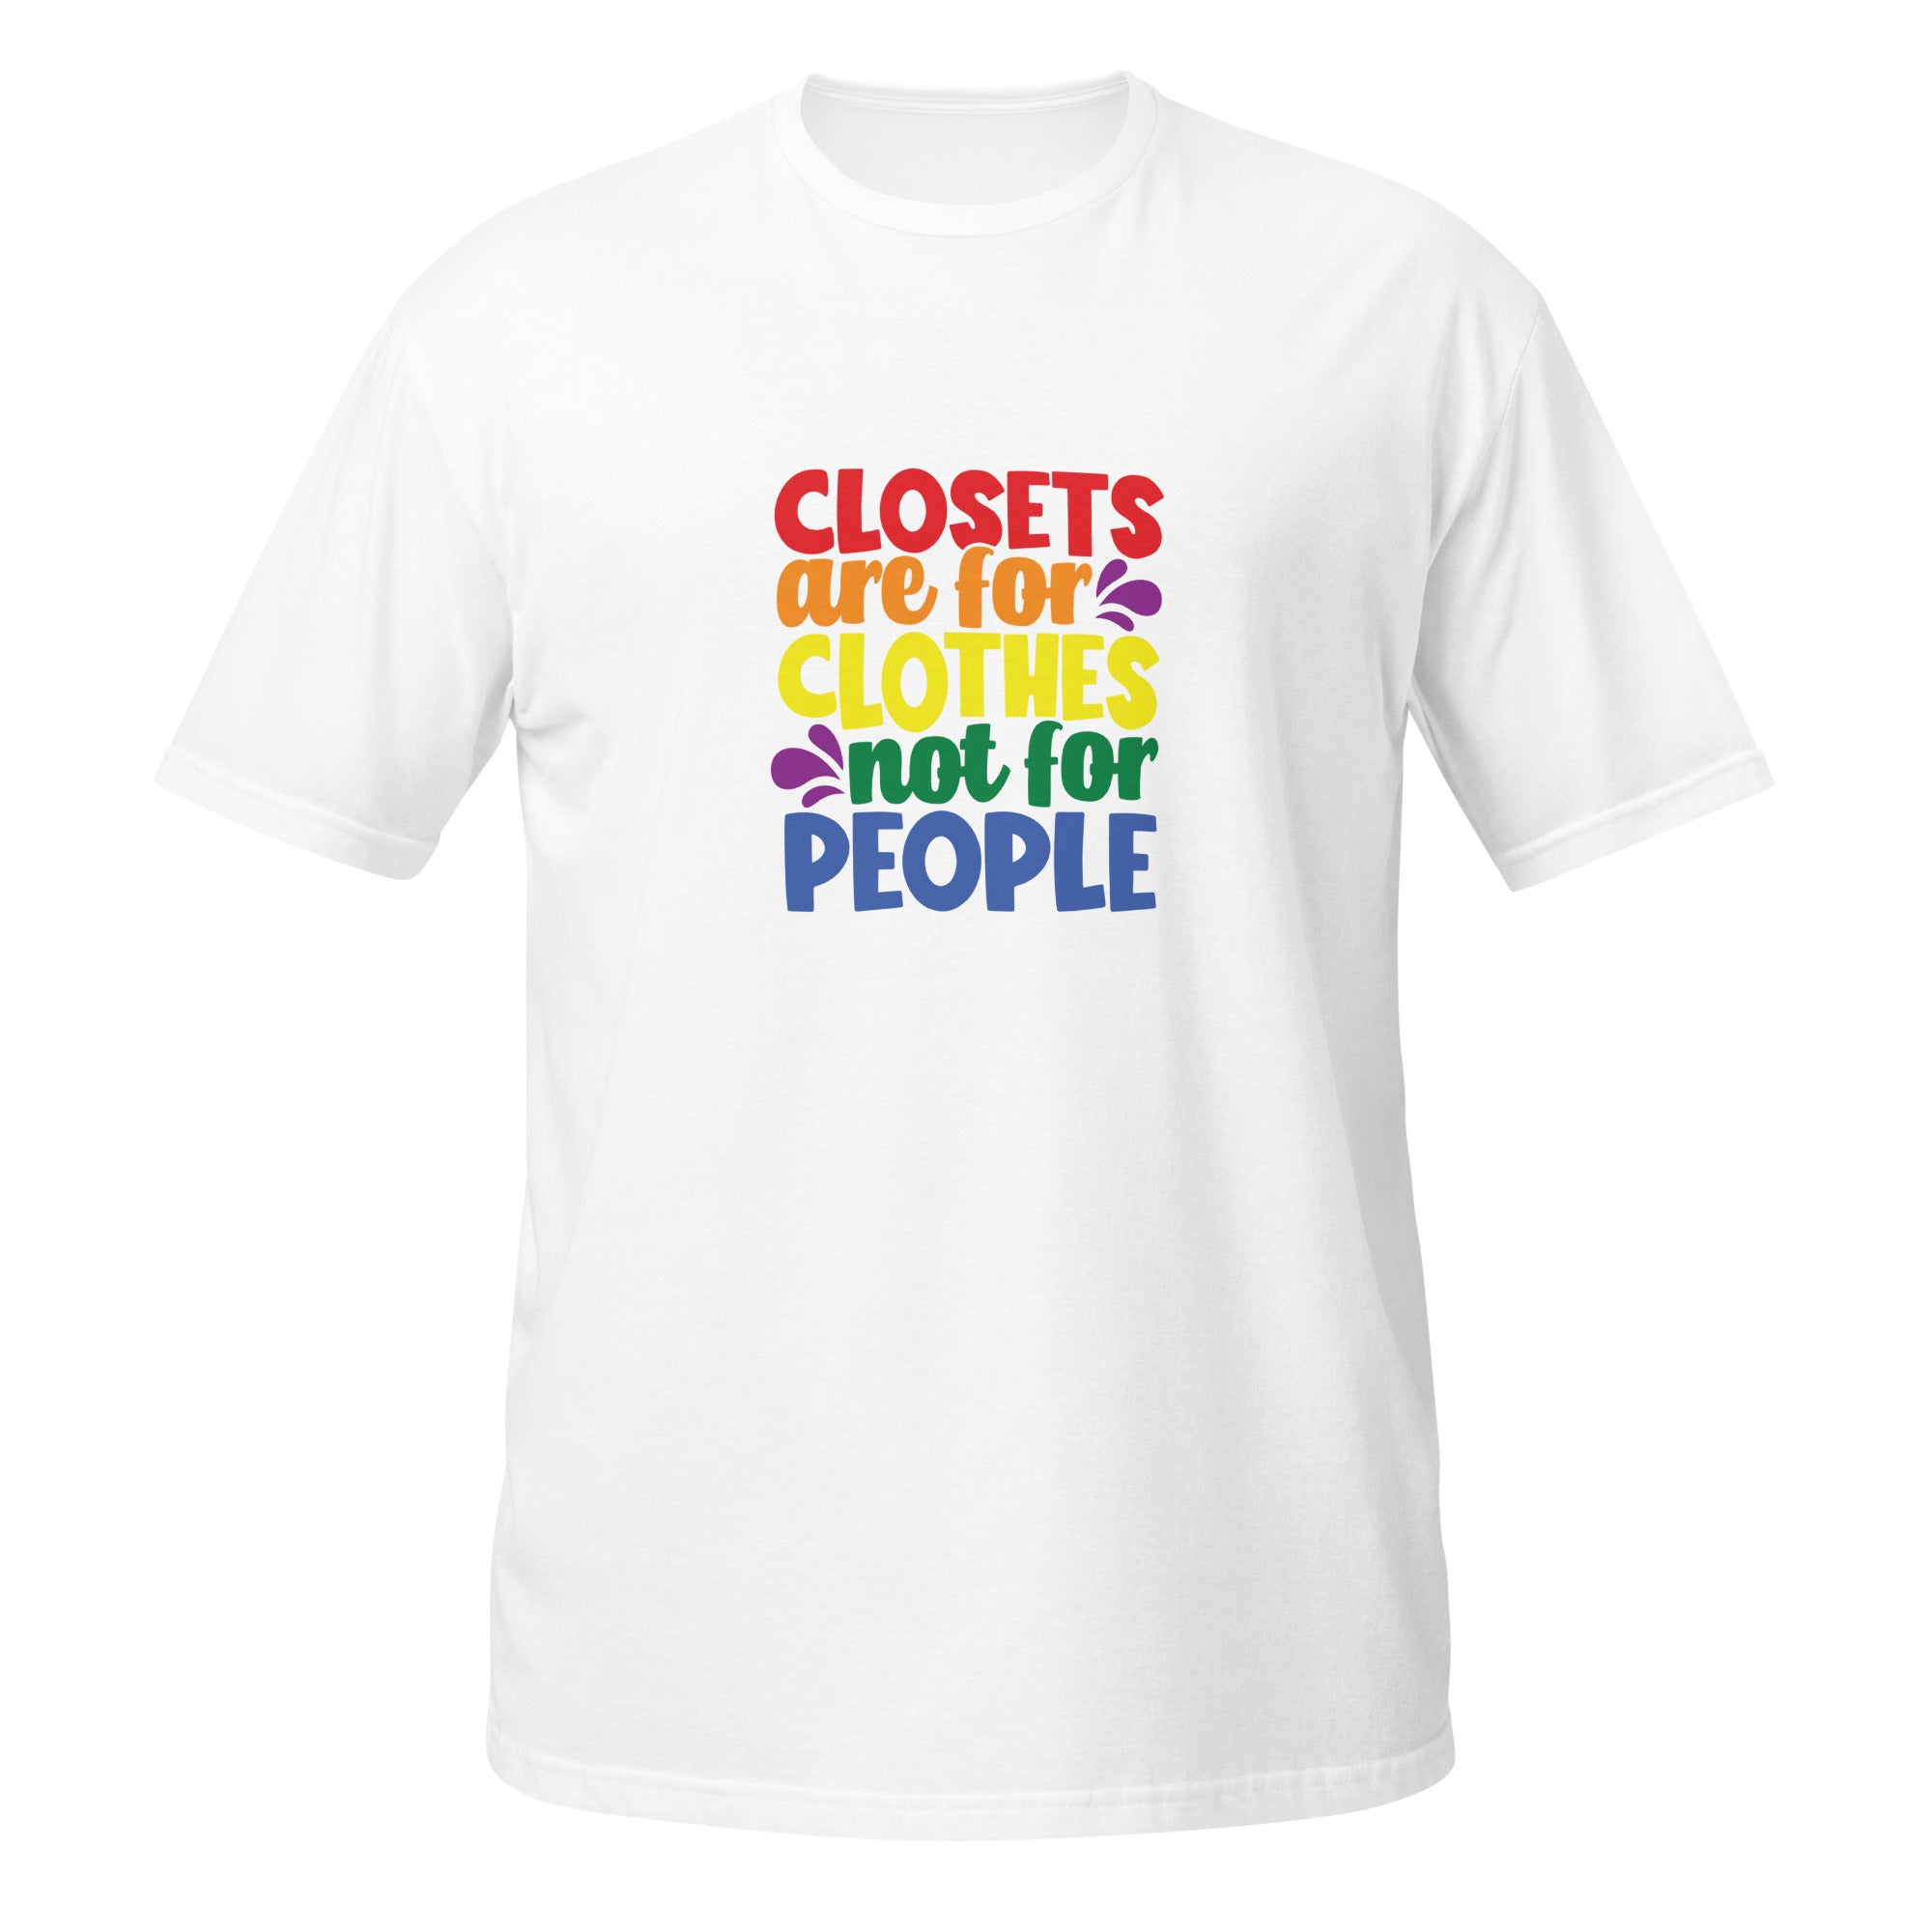 Short-Sleeve Unisex T-Shirt- Closets are for clothes not for people